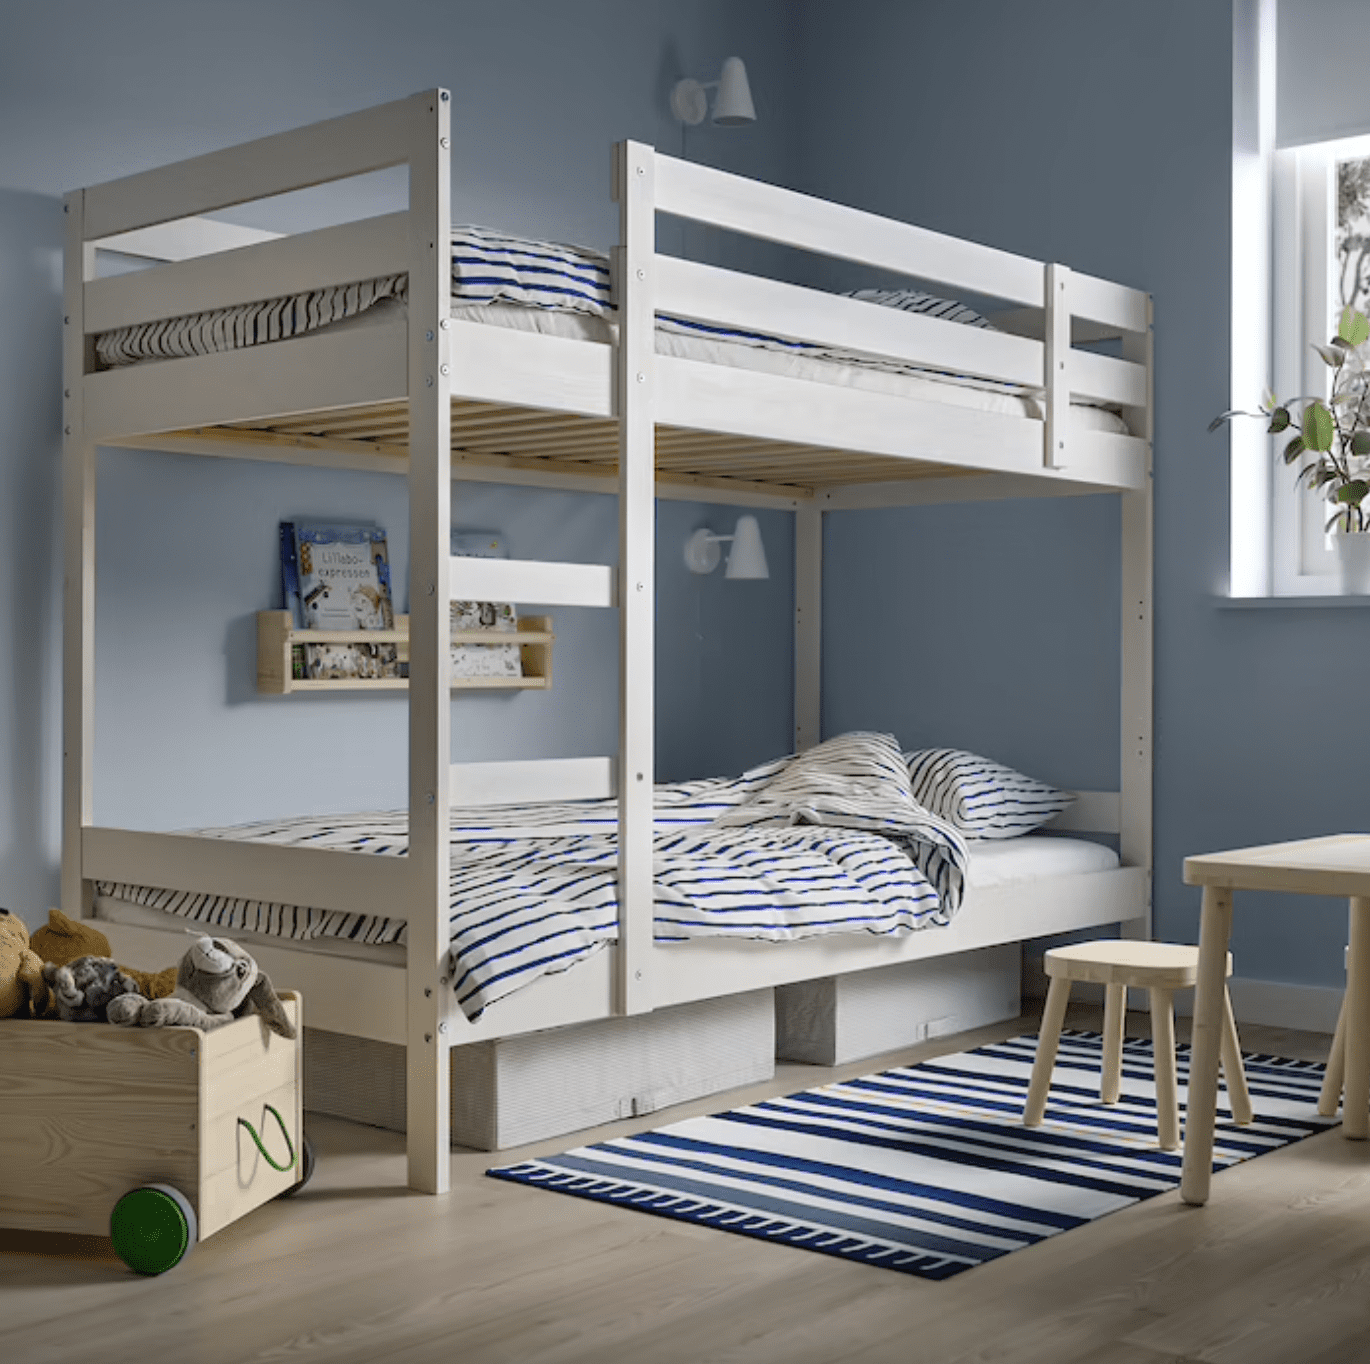 The Best $16 Kids Product at IKEA